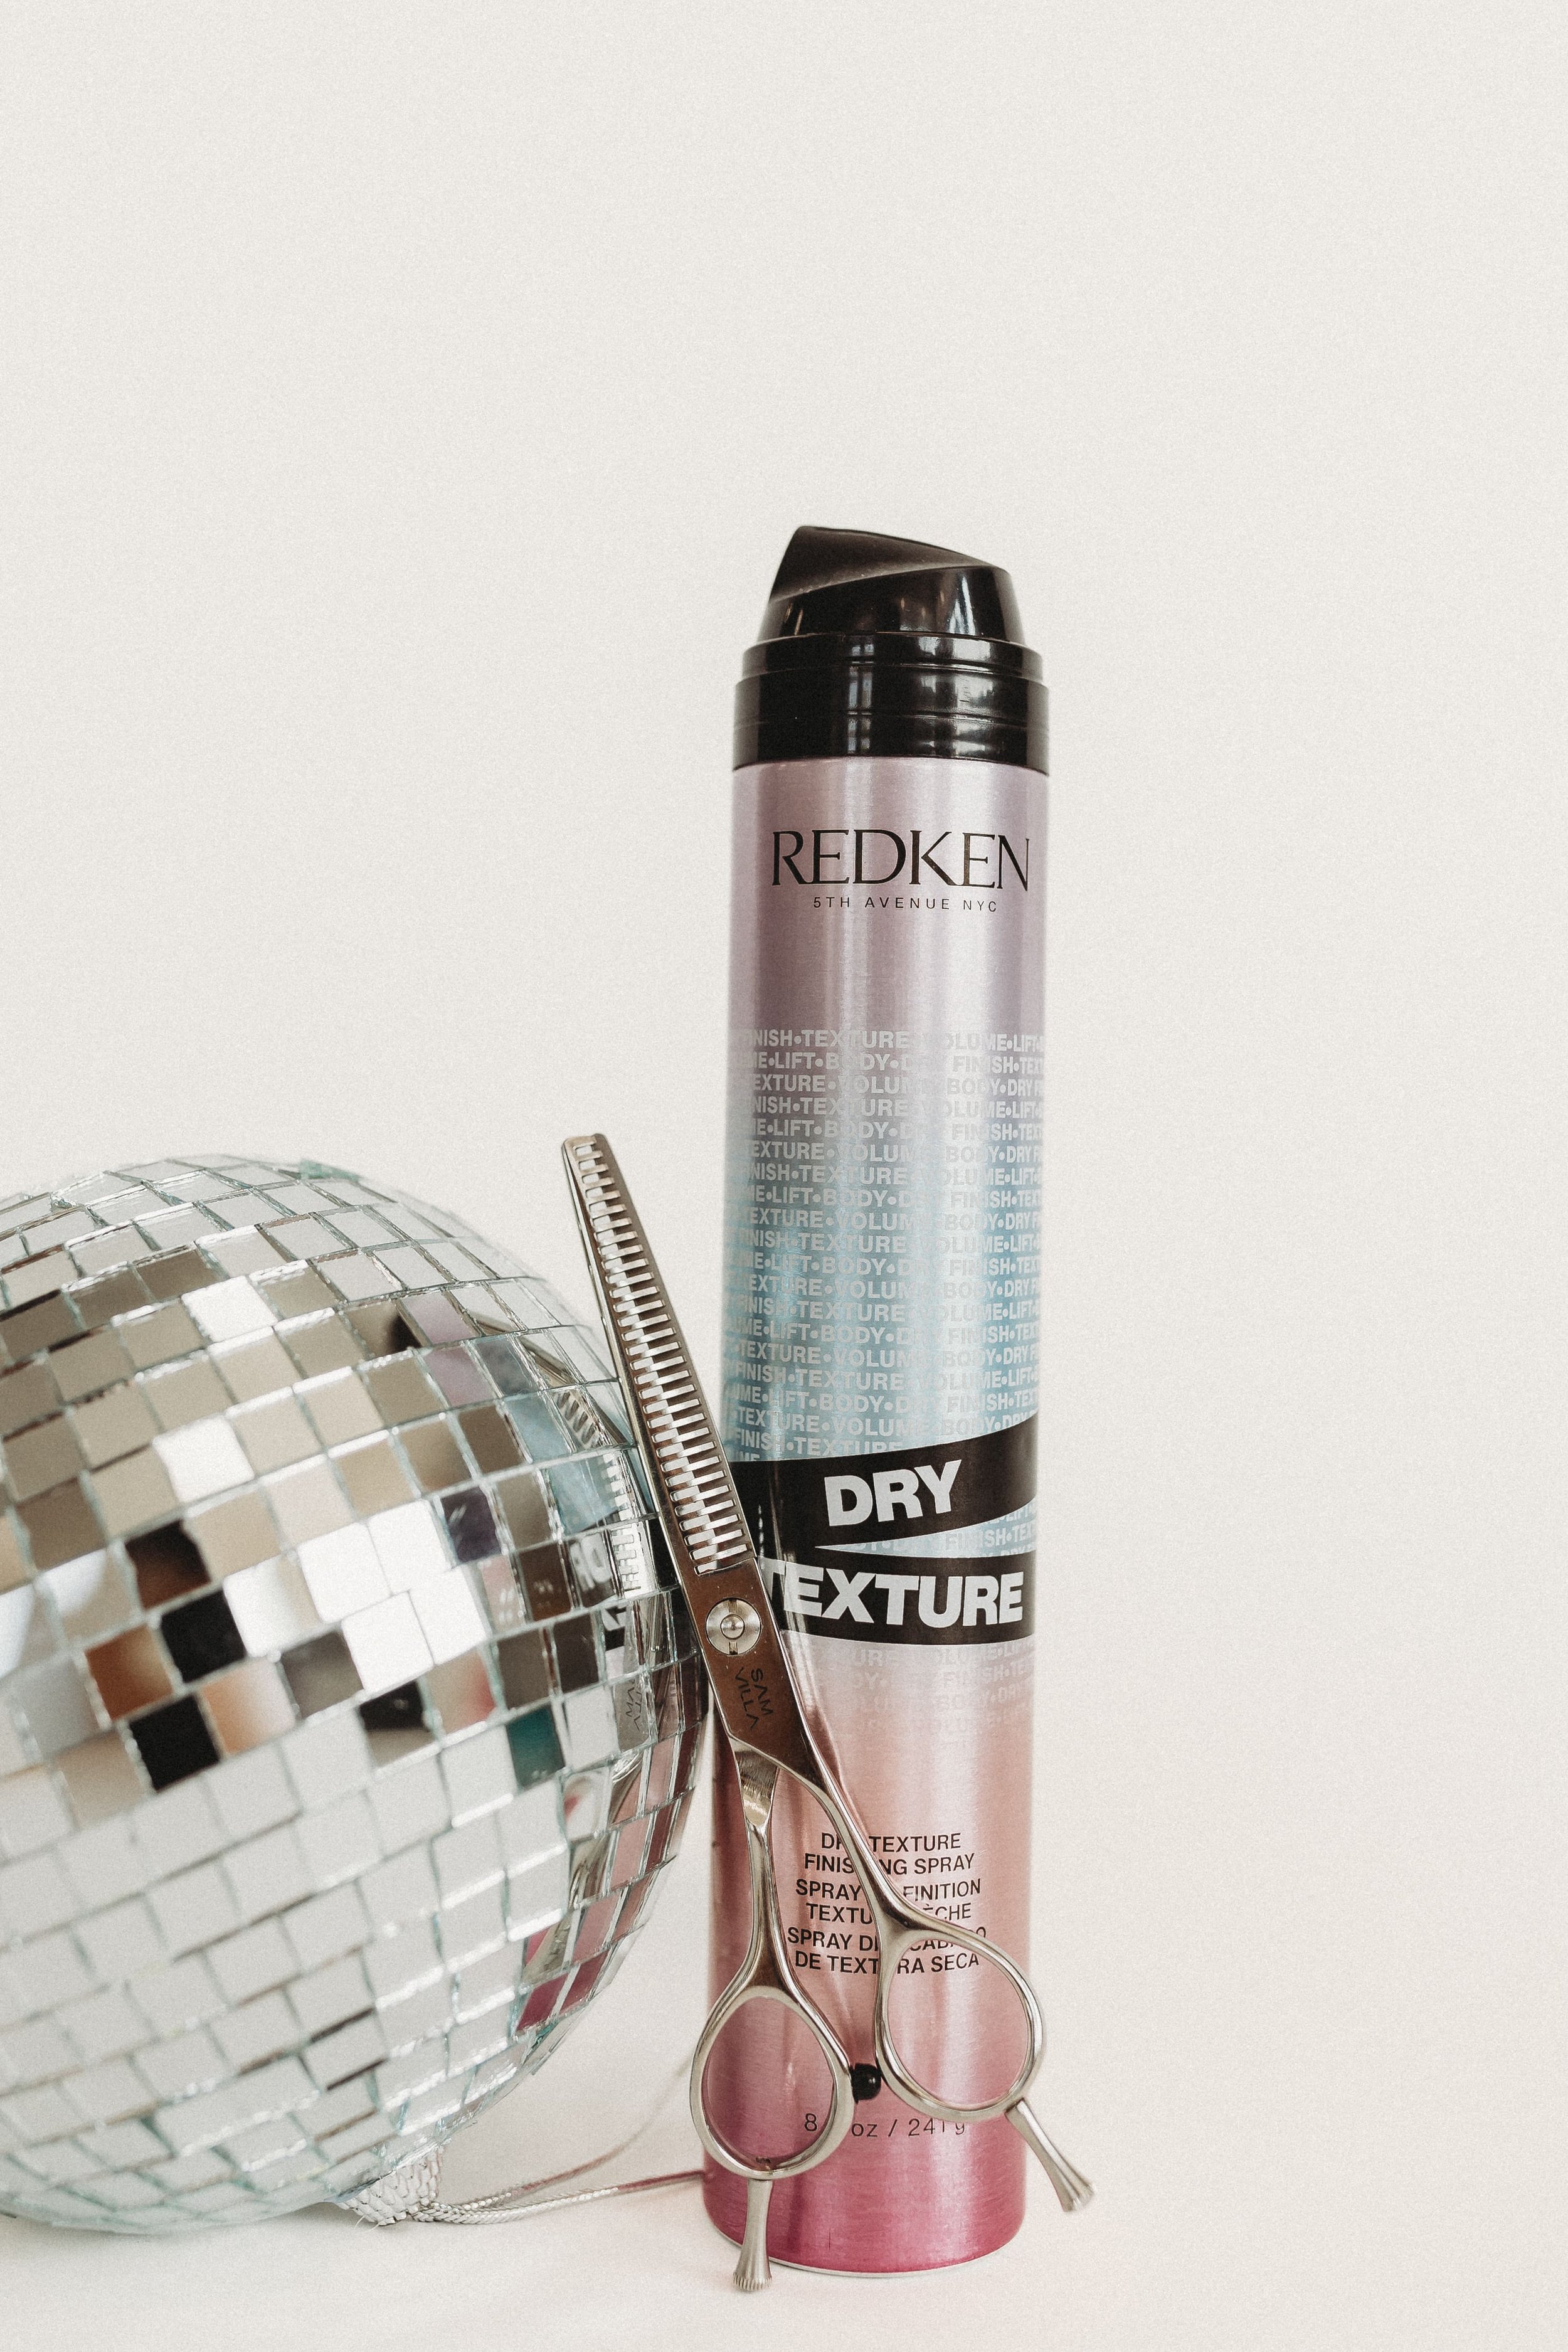  a pair of sheers leans on a disco bal next to a bottle of dry texture spray 